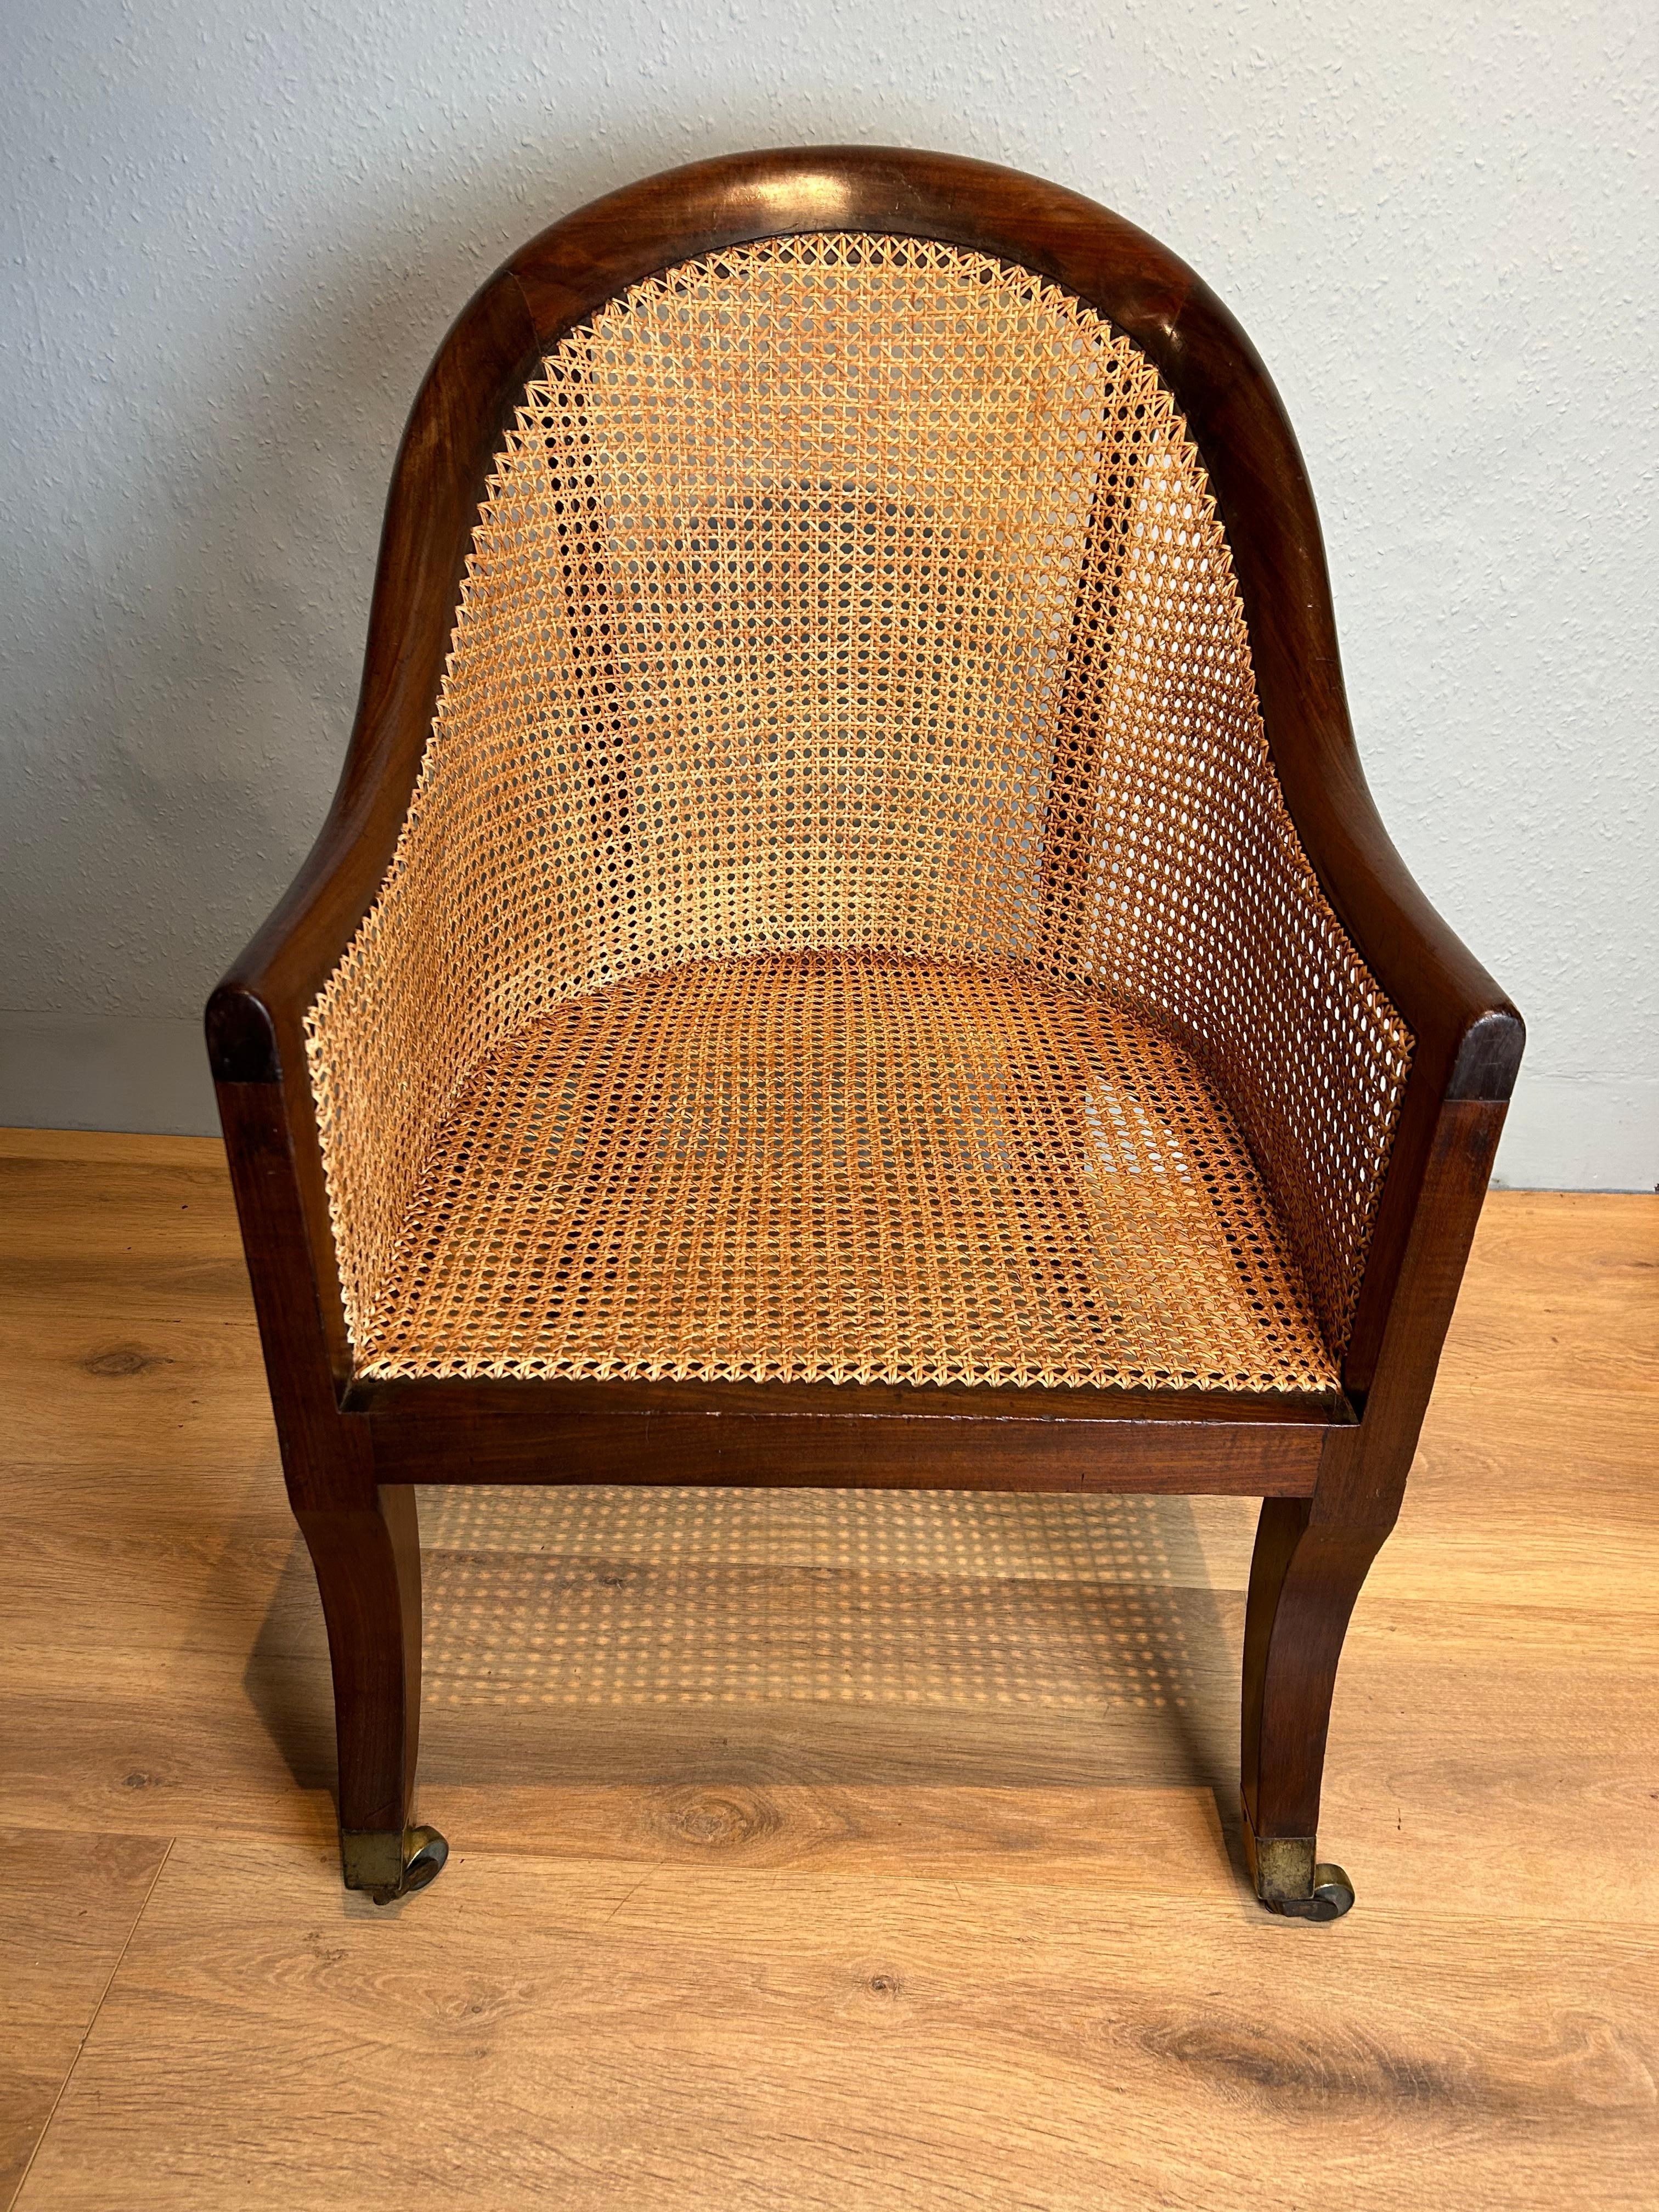 Antique Regency mahogany Bergere arm chair circa 1820 attributed to Gillows in the Roman style. Wonderful flowing shape with elegance, sabre legs to the front and splayed legs to the back ending on quality angled brass castors, ca me work is in